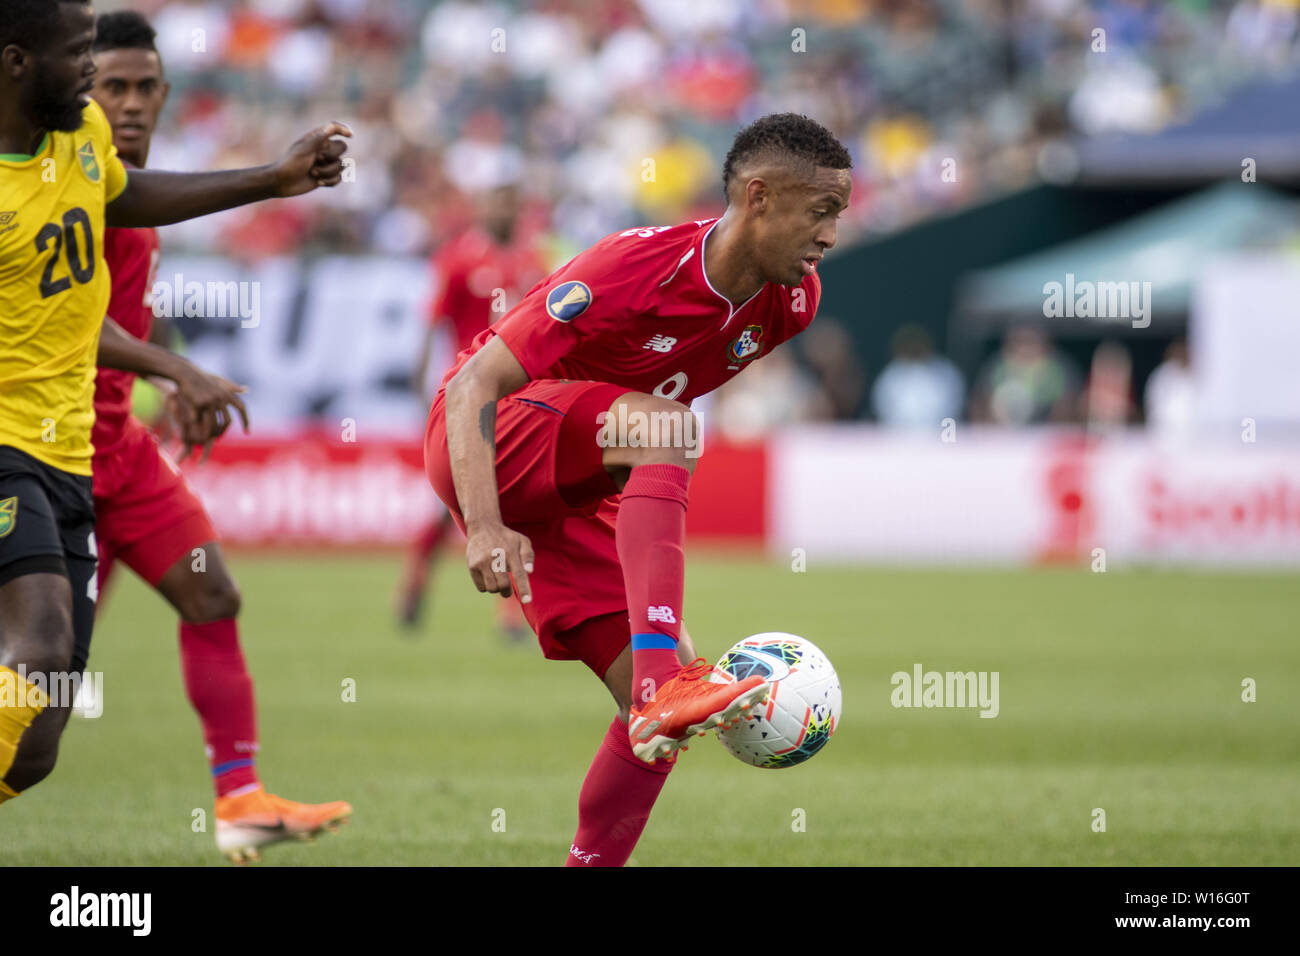 Philadelphia, Pennsylvania, USA. 30th June, 2019. GABRIEL TORRES (9) fights for the ball during the match the match in Philadelphia PA Credit: Ricky Fitchett/ZUMA Wire/Alamy Live News Stock Photo